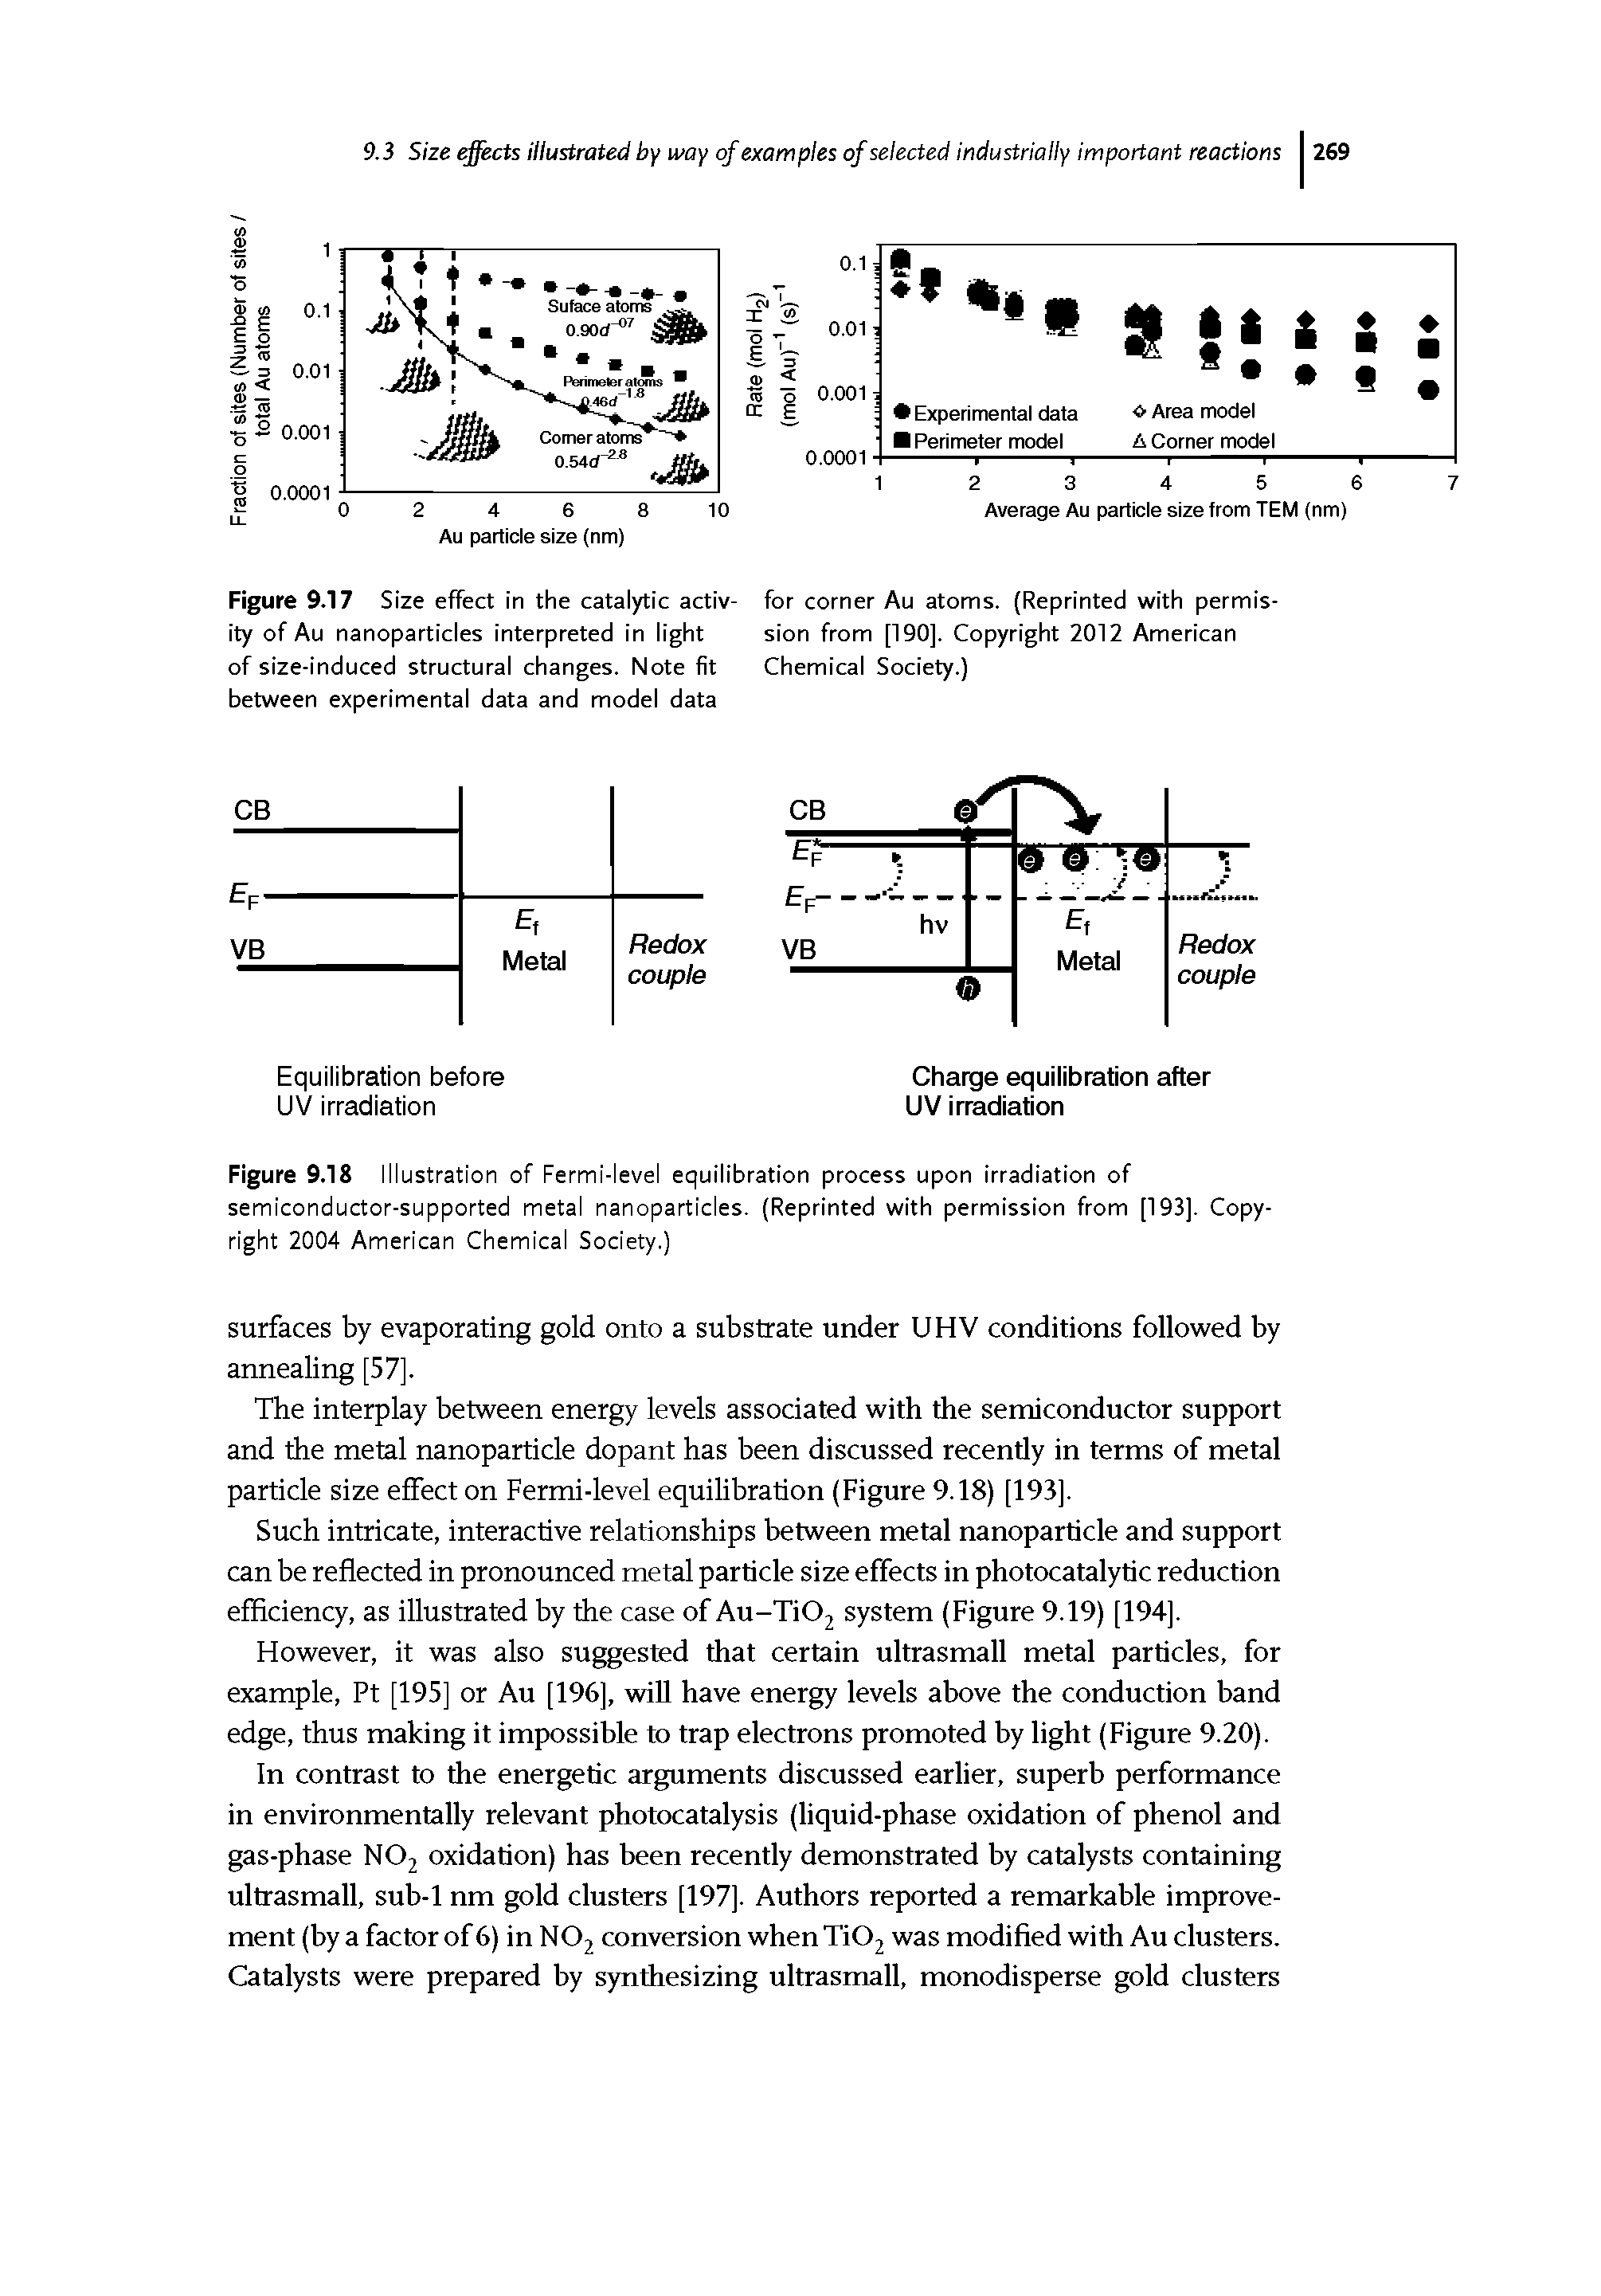 Figure 9.18 Illustration of Fermi-level equilibration process upon irradiation of semiconductor-supported metal nanoparticles. (Reprinted with permission from [193]. Copyright 2004 American Chemical Society.)...